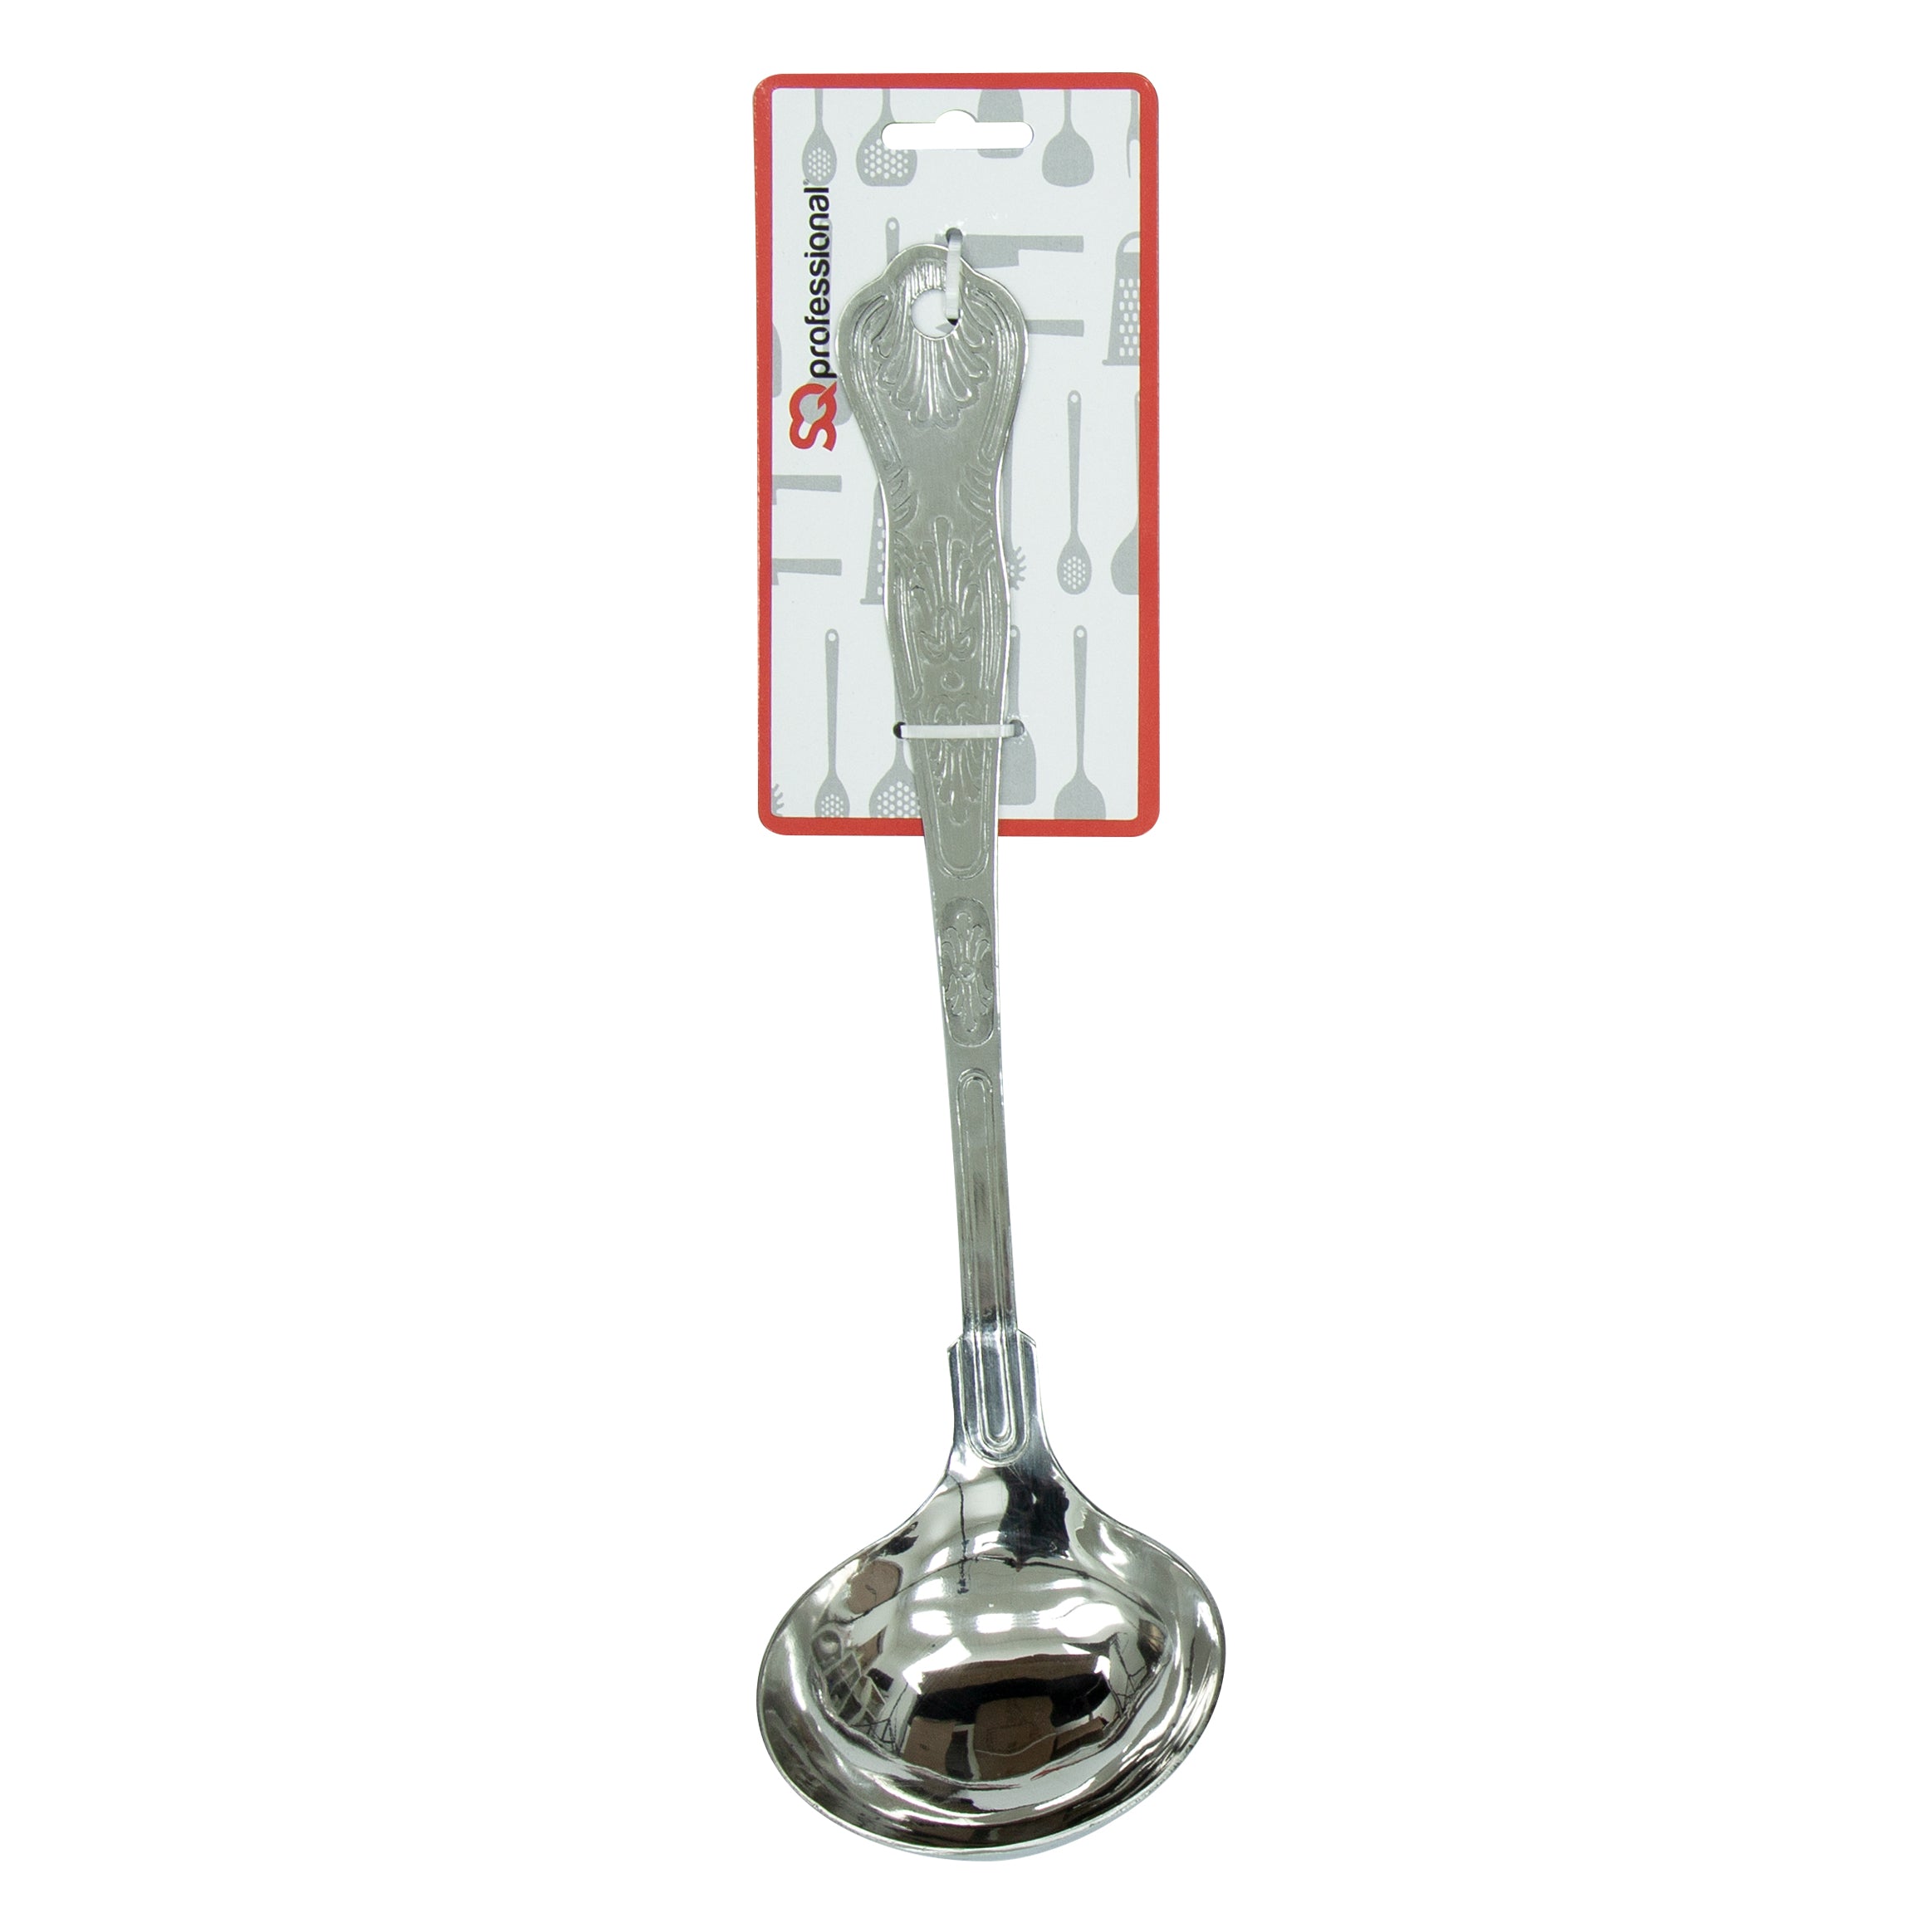 Stainless Steel Soup Ladle - King Pattern